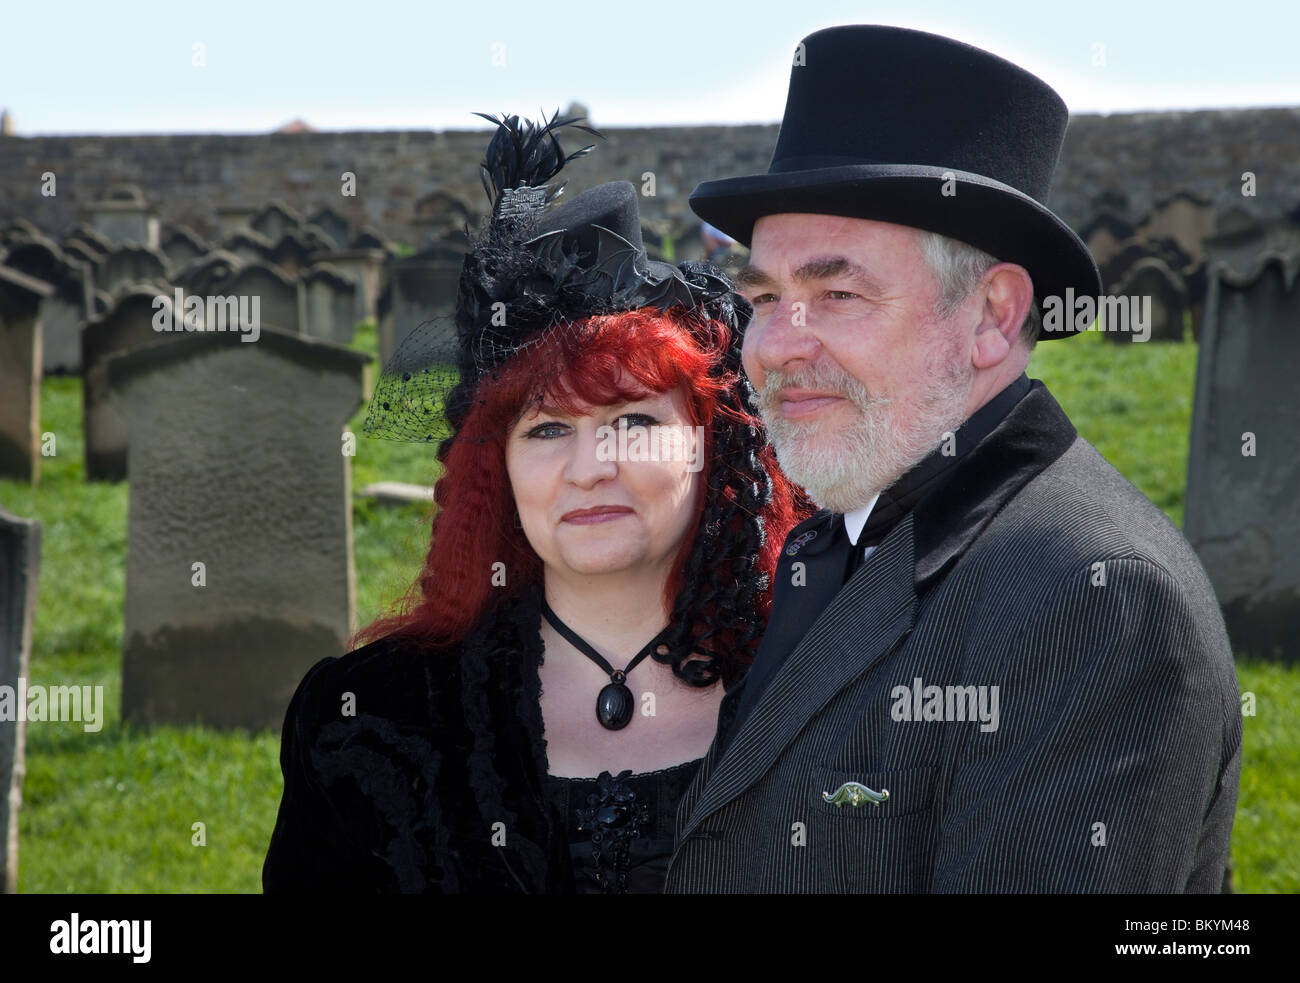 Family of Goths. Two woman and man, a family Gothic couples group all dressed in Victorian Costume at the Whitby Goth Festival, April 2010 Stock Photo